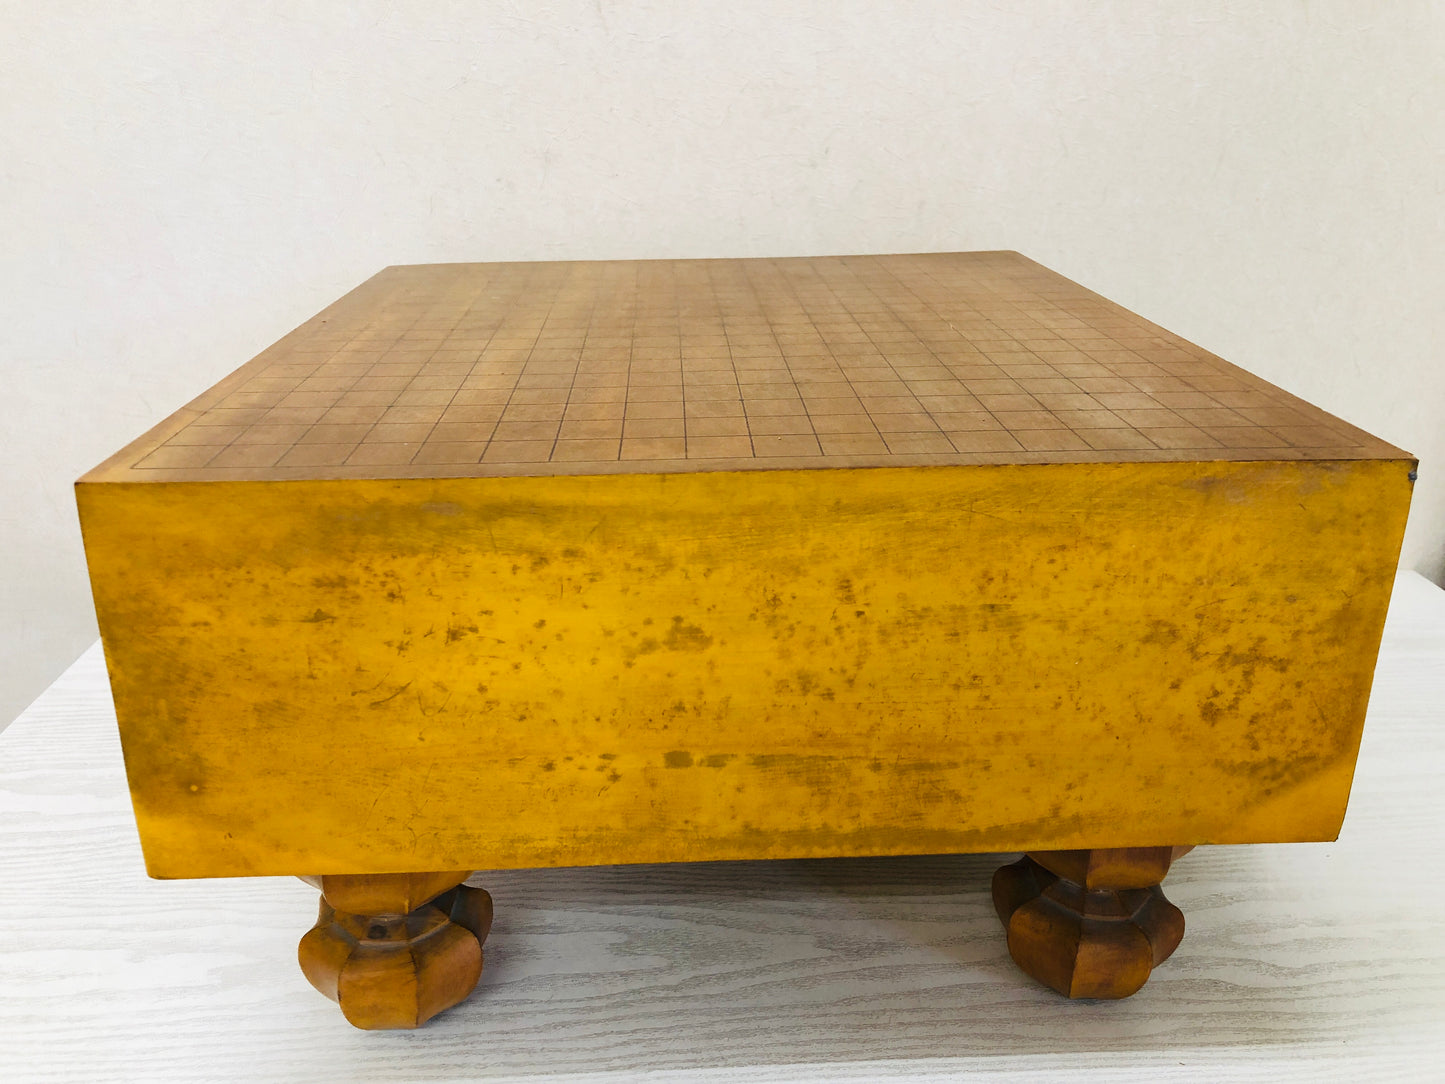 Y3022 GO wood board with legs strategy game Japanese antique Japan vintage